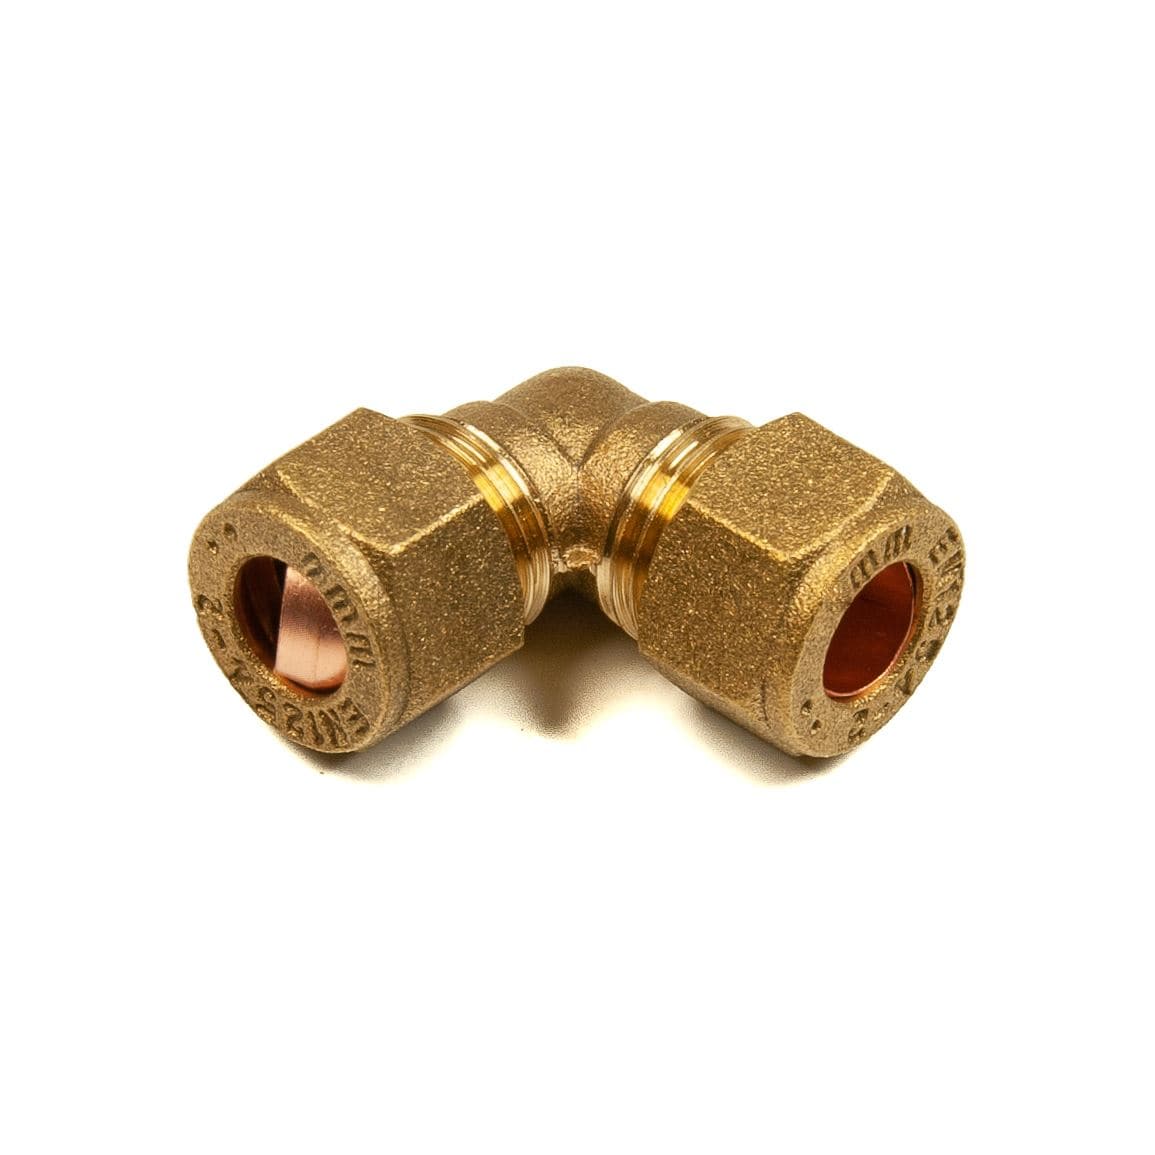 10mm Compression Elbow 90 Degrees Brass Compression Elbows Thunderfix 100017